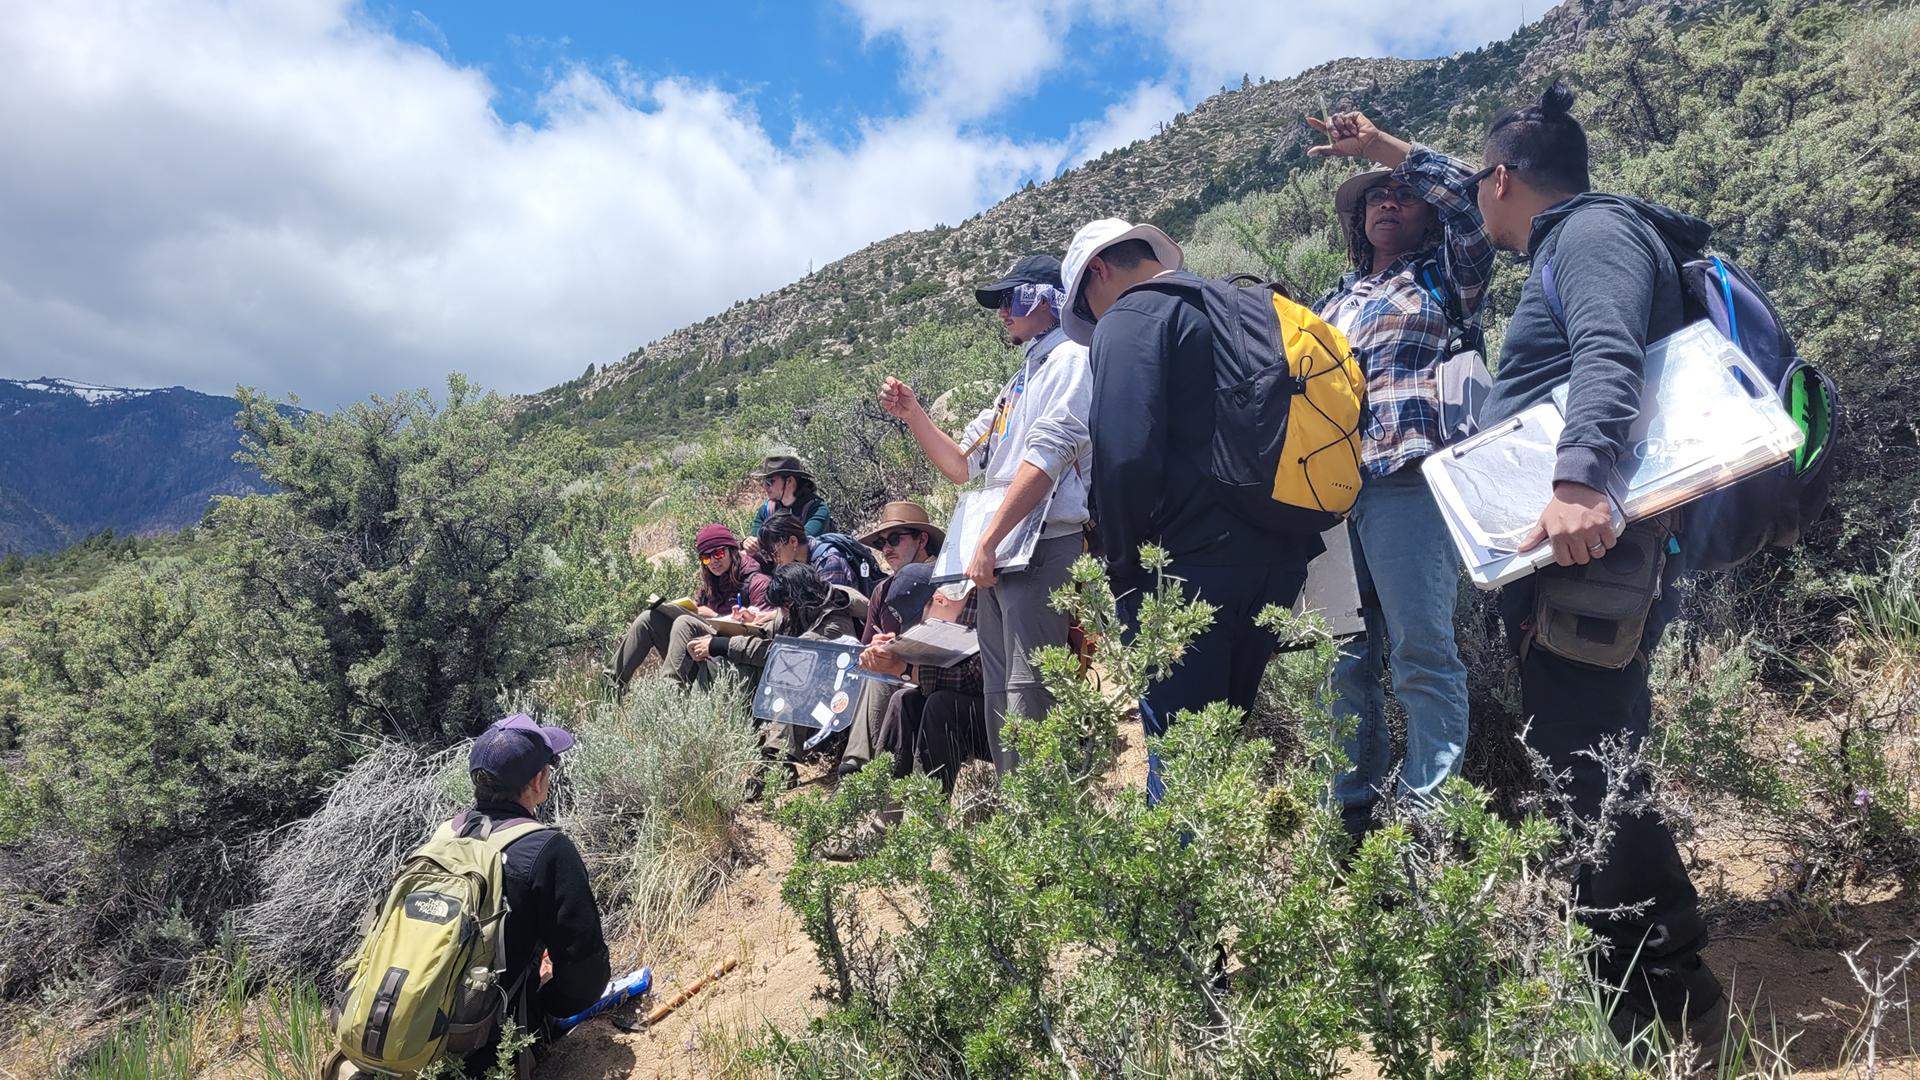 Students get instruction during Geology summer course